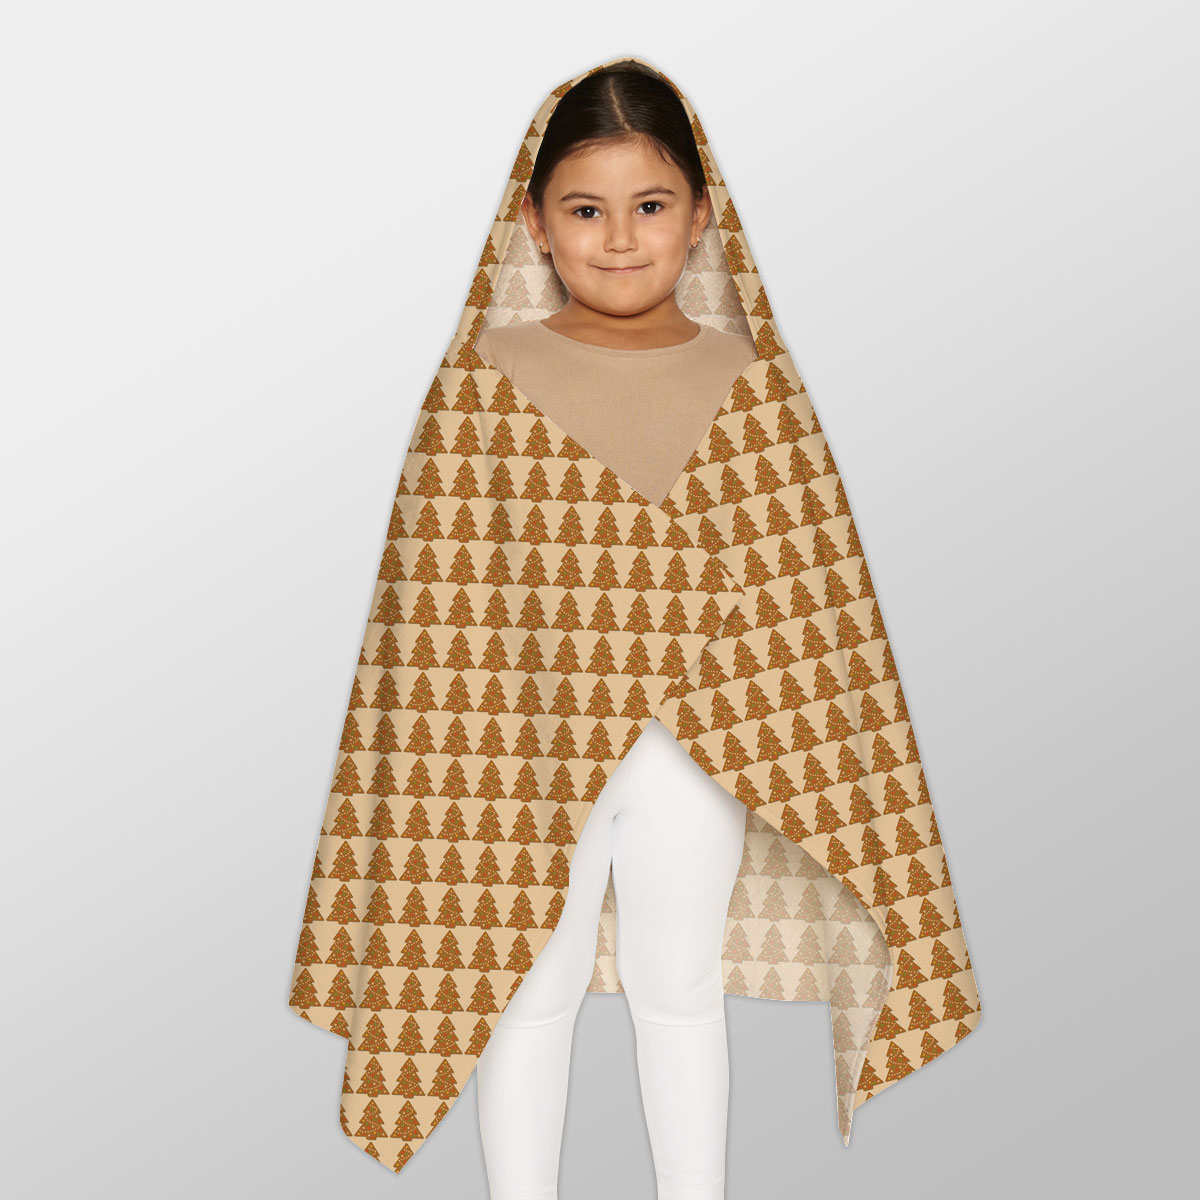 Gingerbread, Gingerbread Christmas Tree Youth Hooded Towel